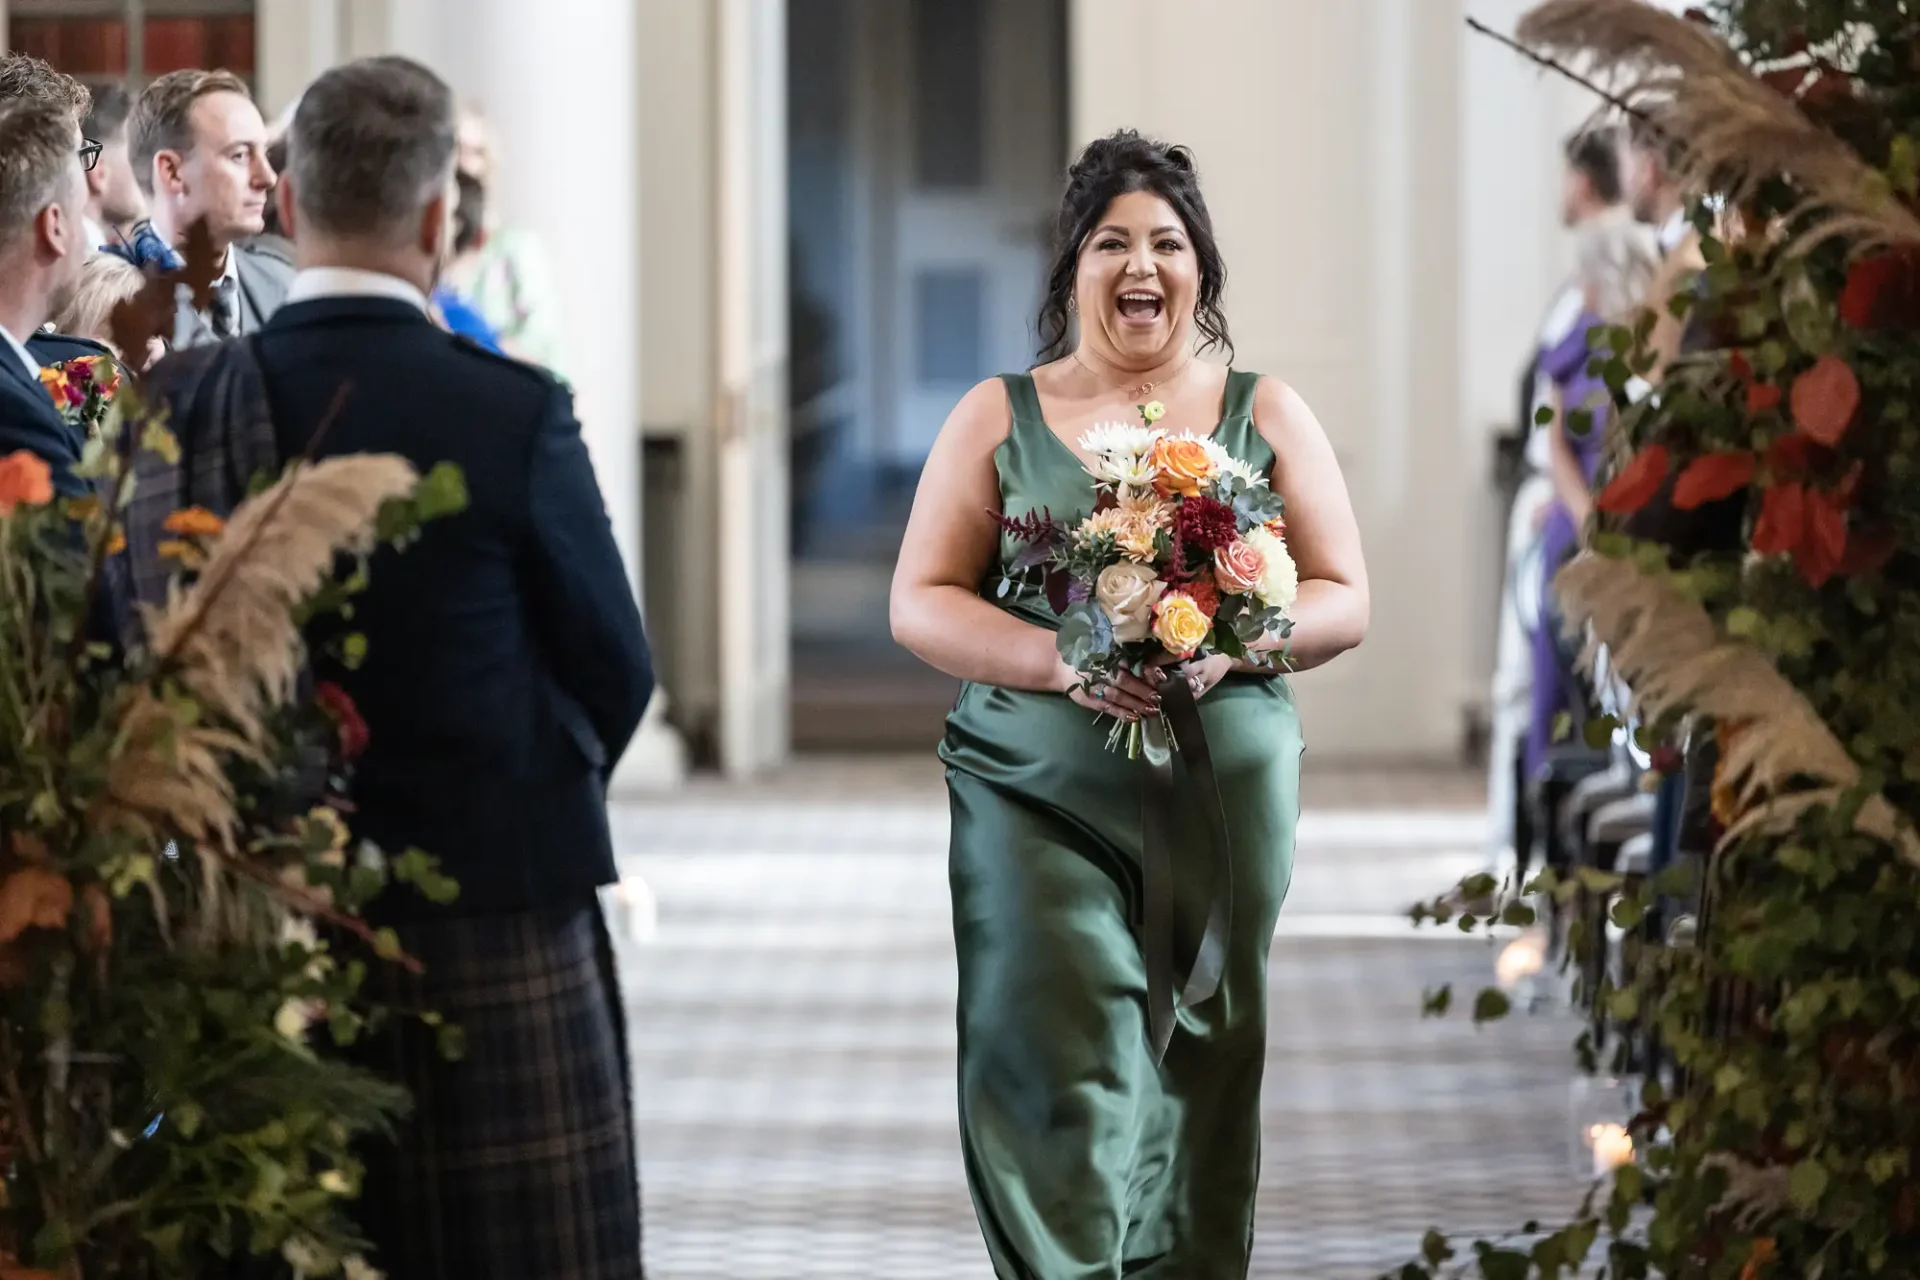 A joyful bridesmaid in a green dress walking down the aisle with a bouquet, laughing, as guests watch.